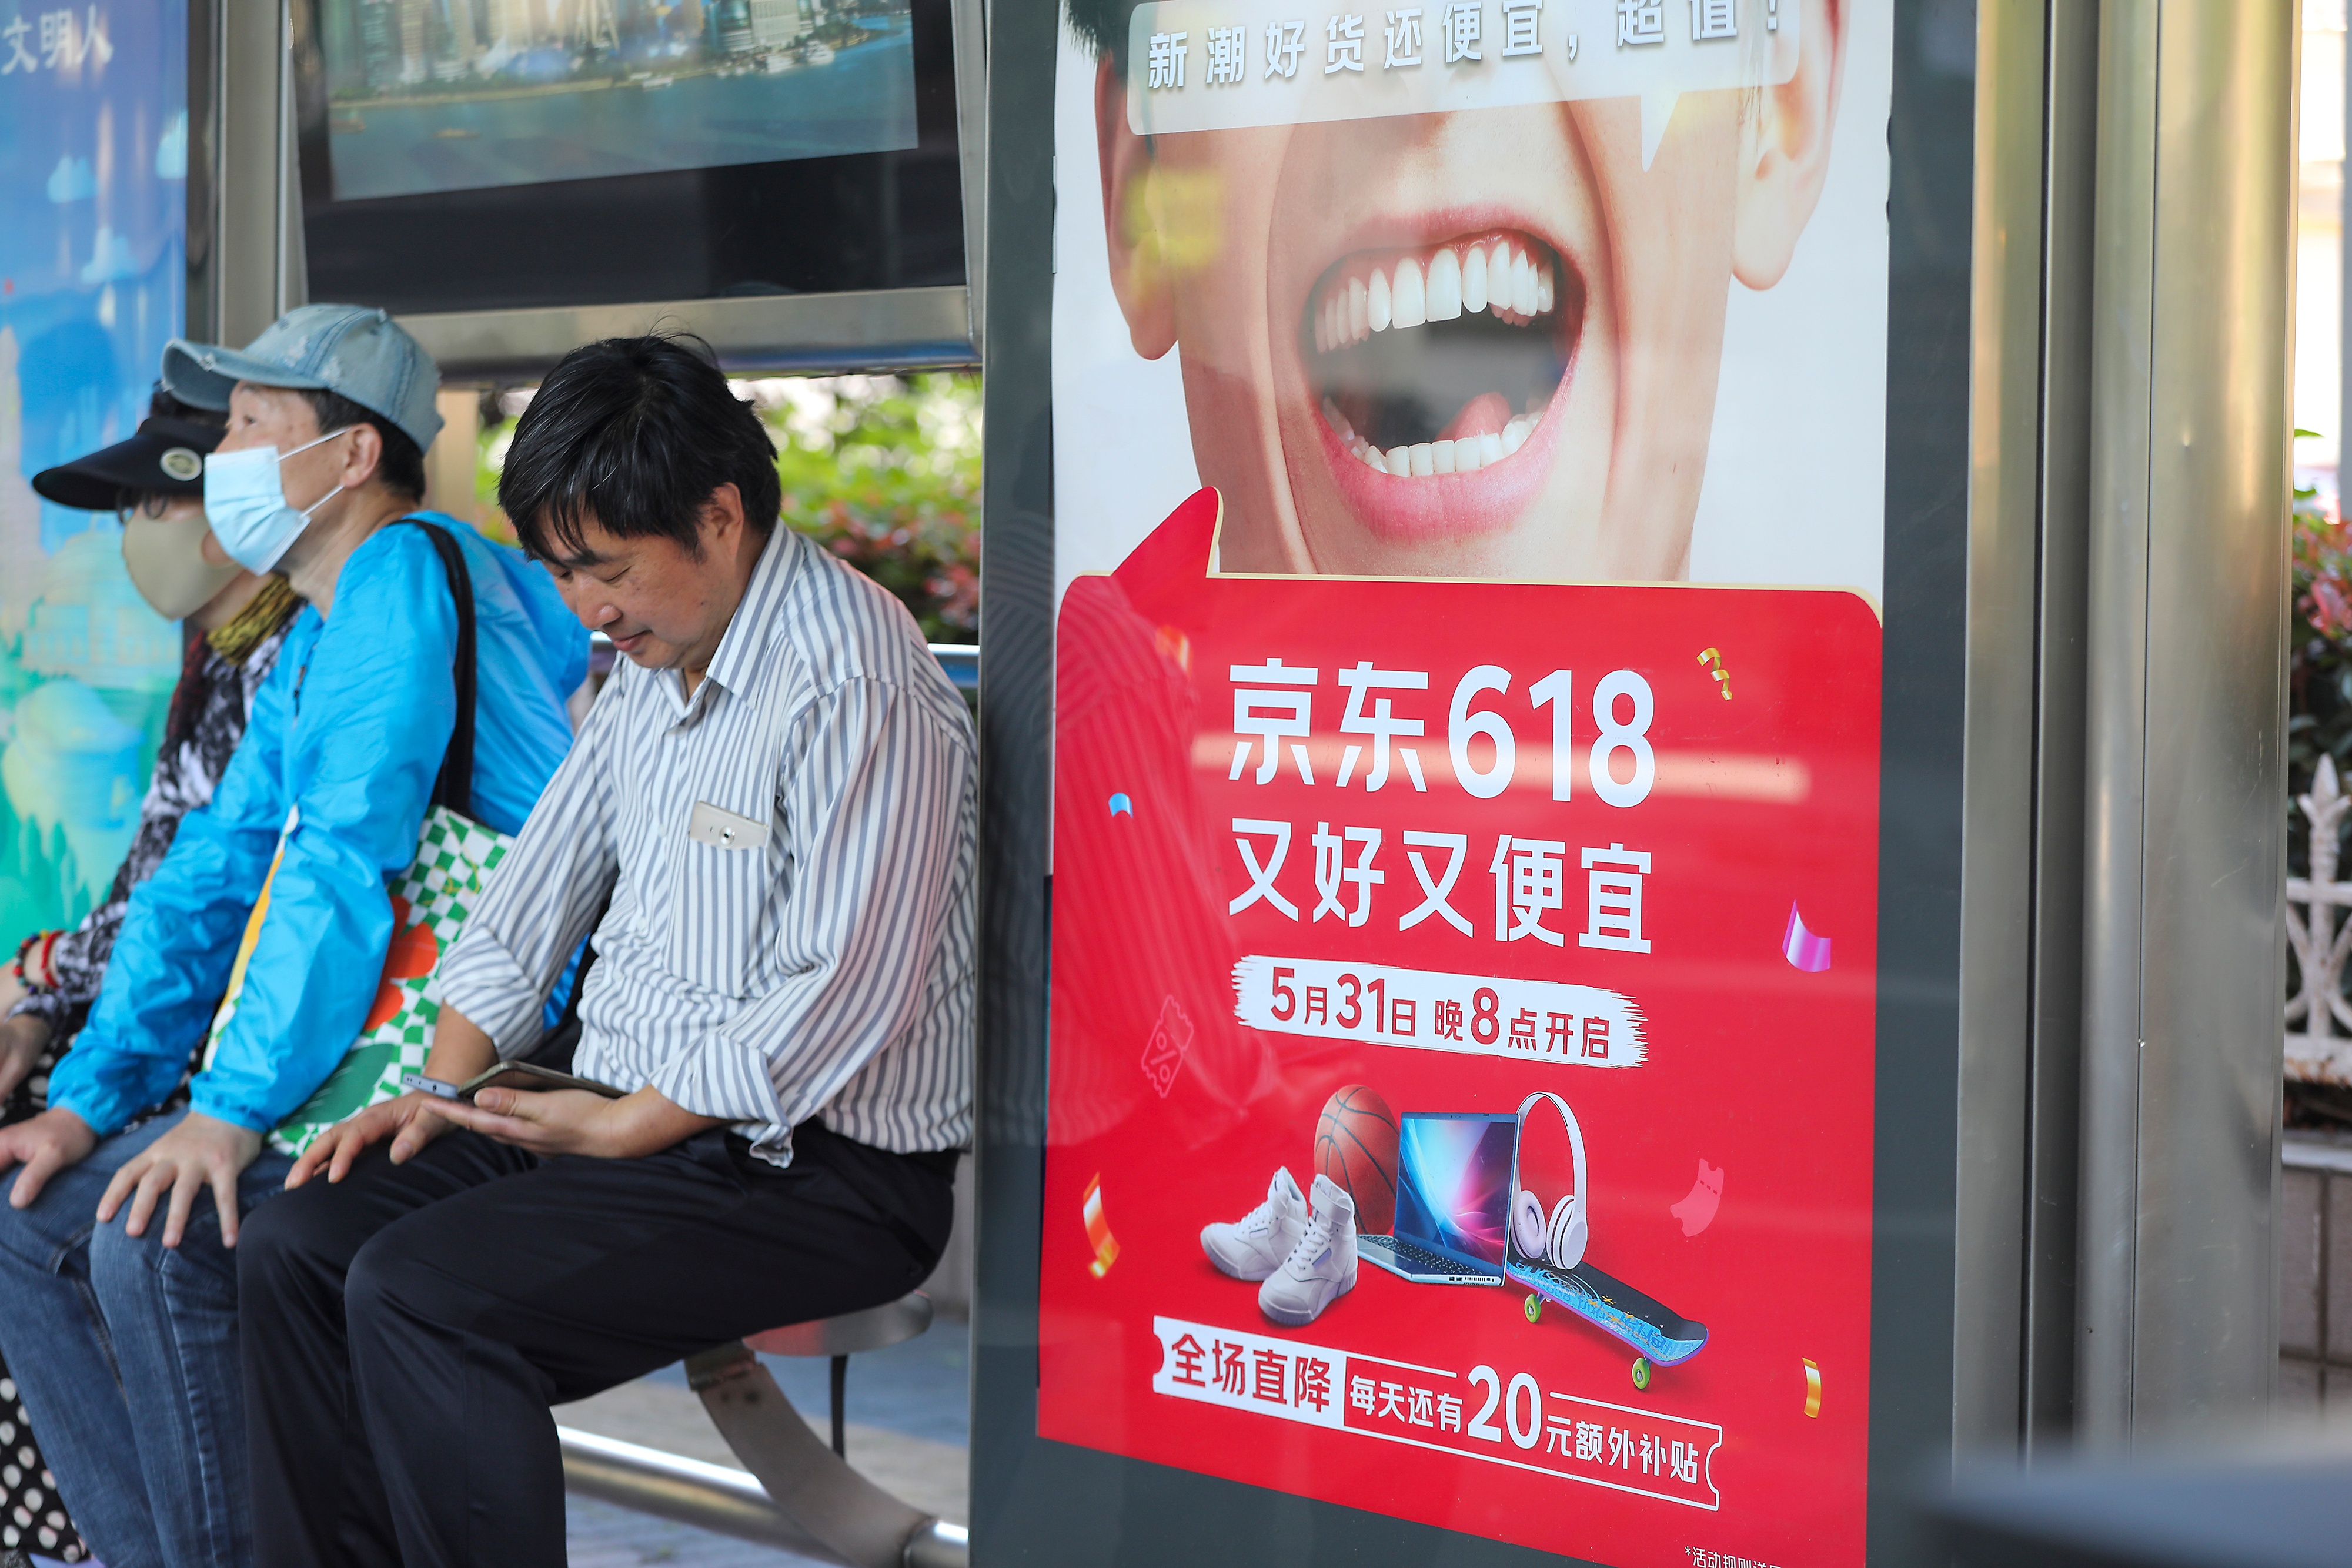 A light box advertisement promoting the 2024 JD.com 618 Shopping Festival is seen in Shanghai. Image: VCG via Getty Images